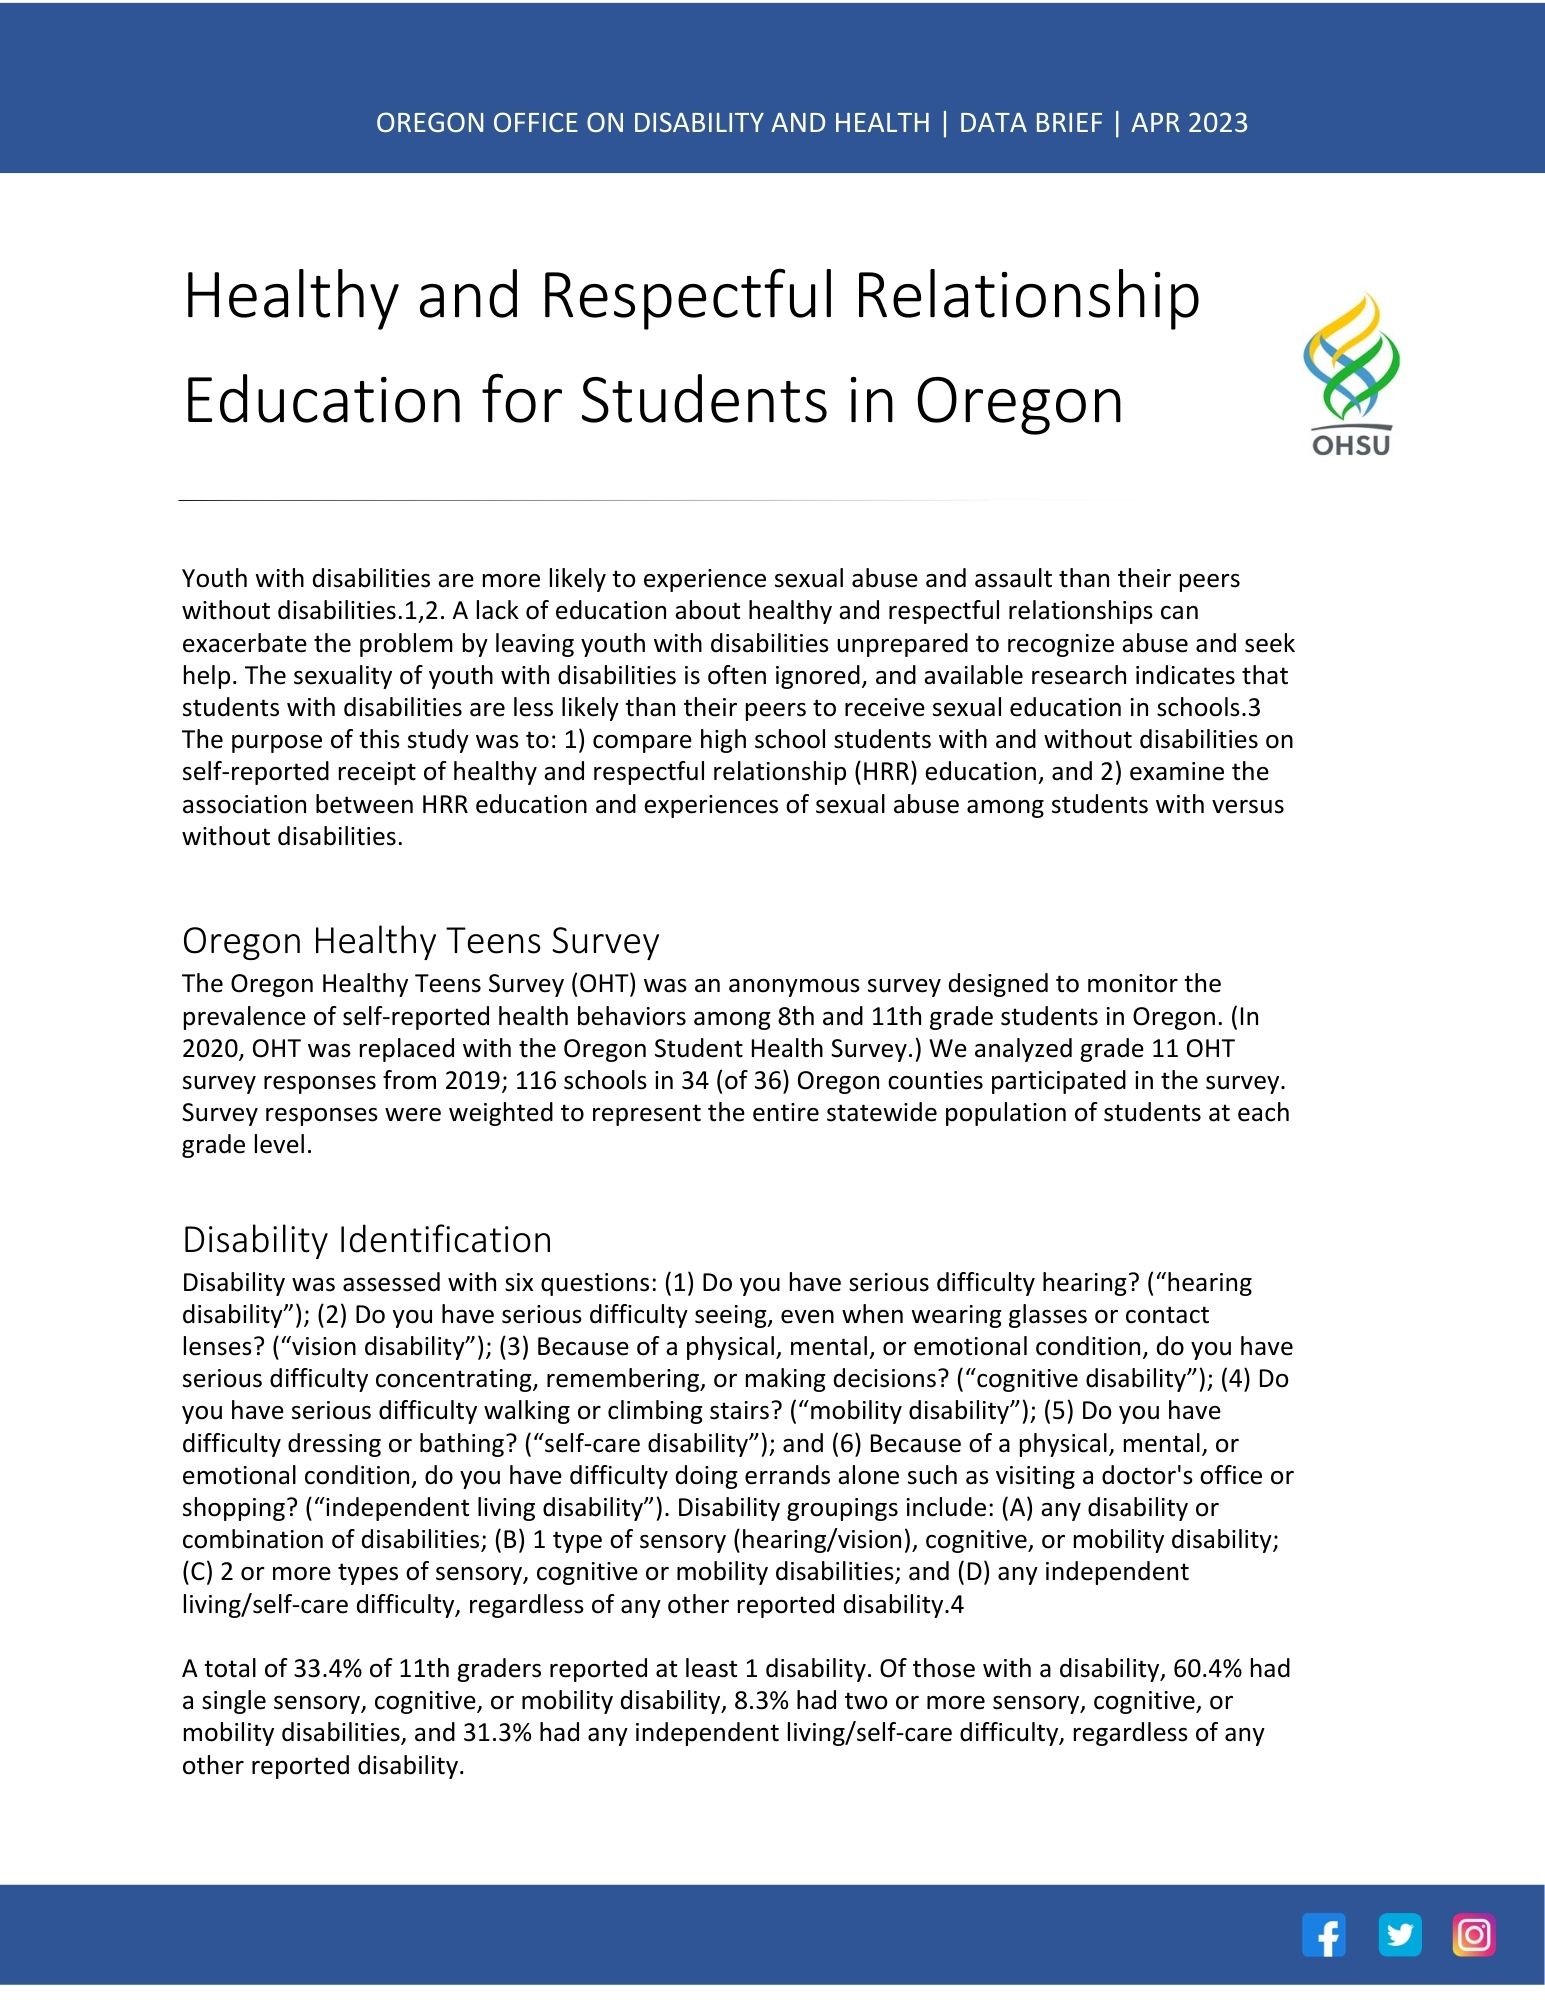 Health and Respectful Relationship Education for Students in Oregon